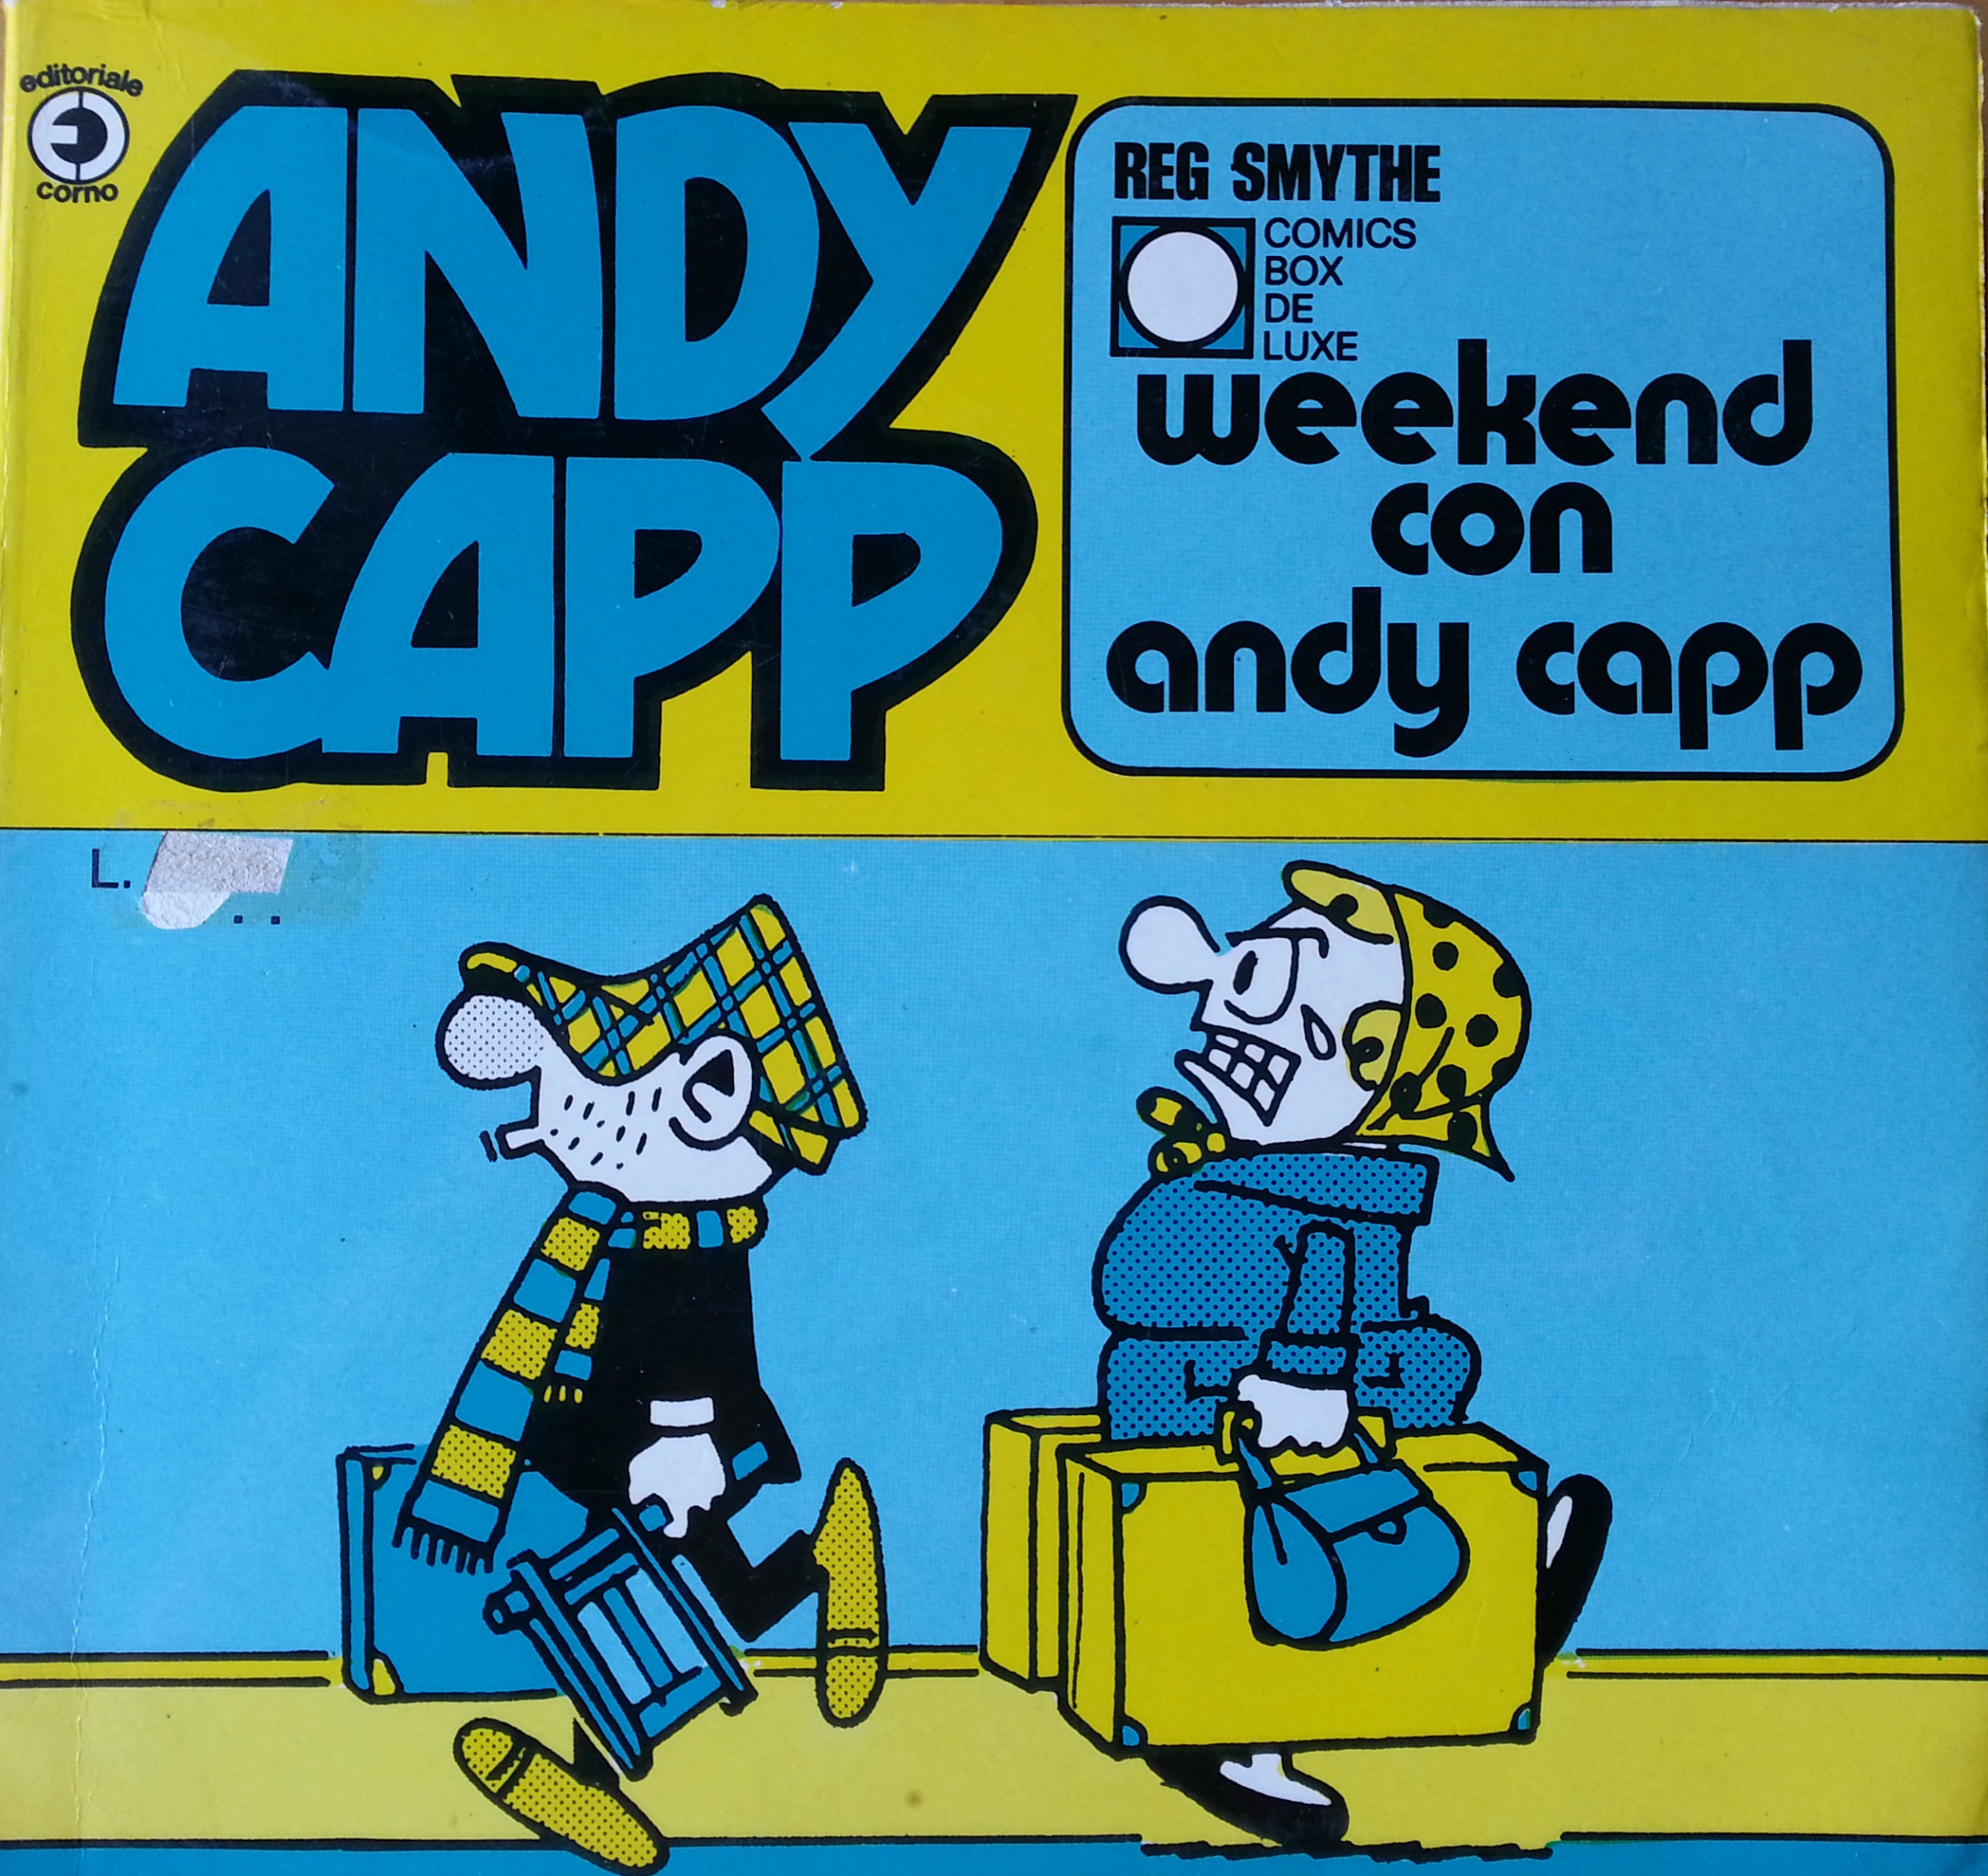 Andy Capp Weekend Con Andy Capp Reg Smythe Anobii